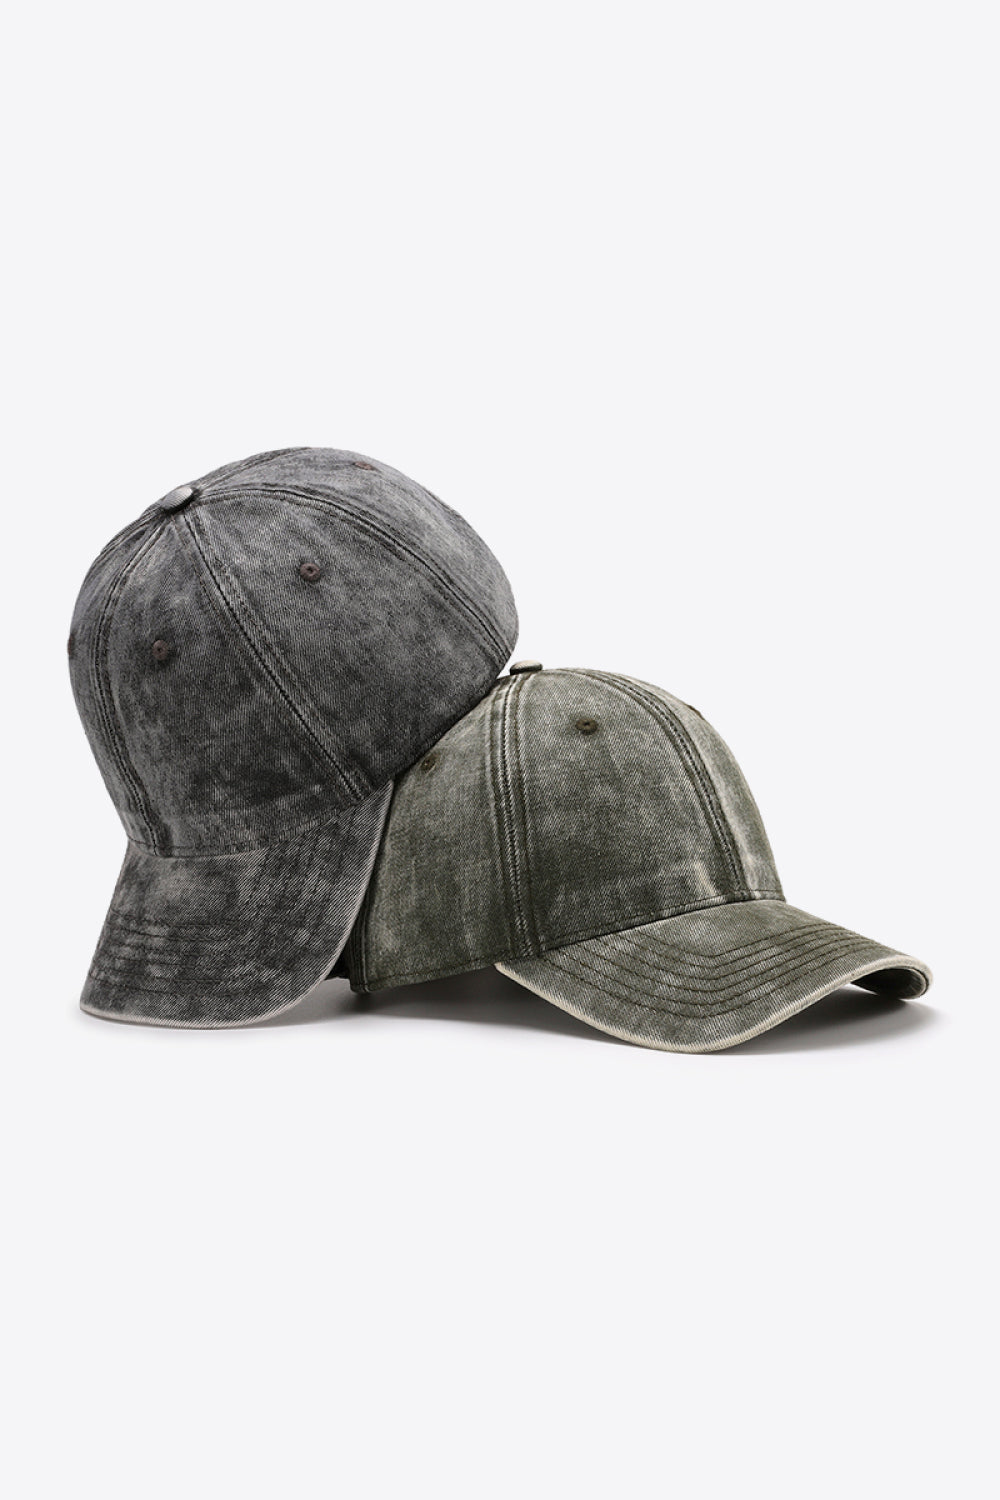 Denim Baseball Hats together in green and black